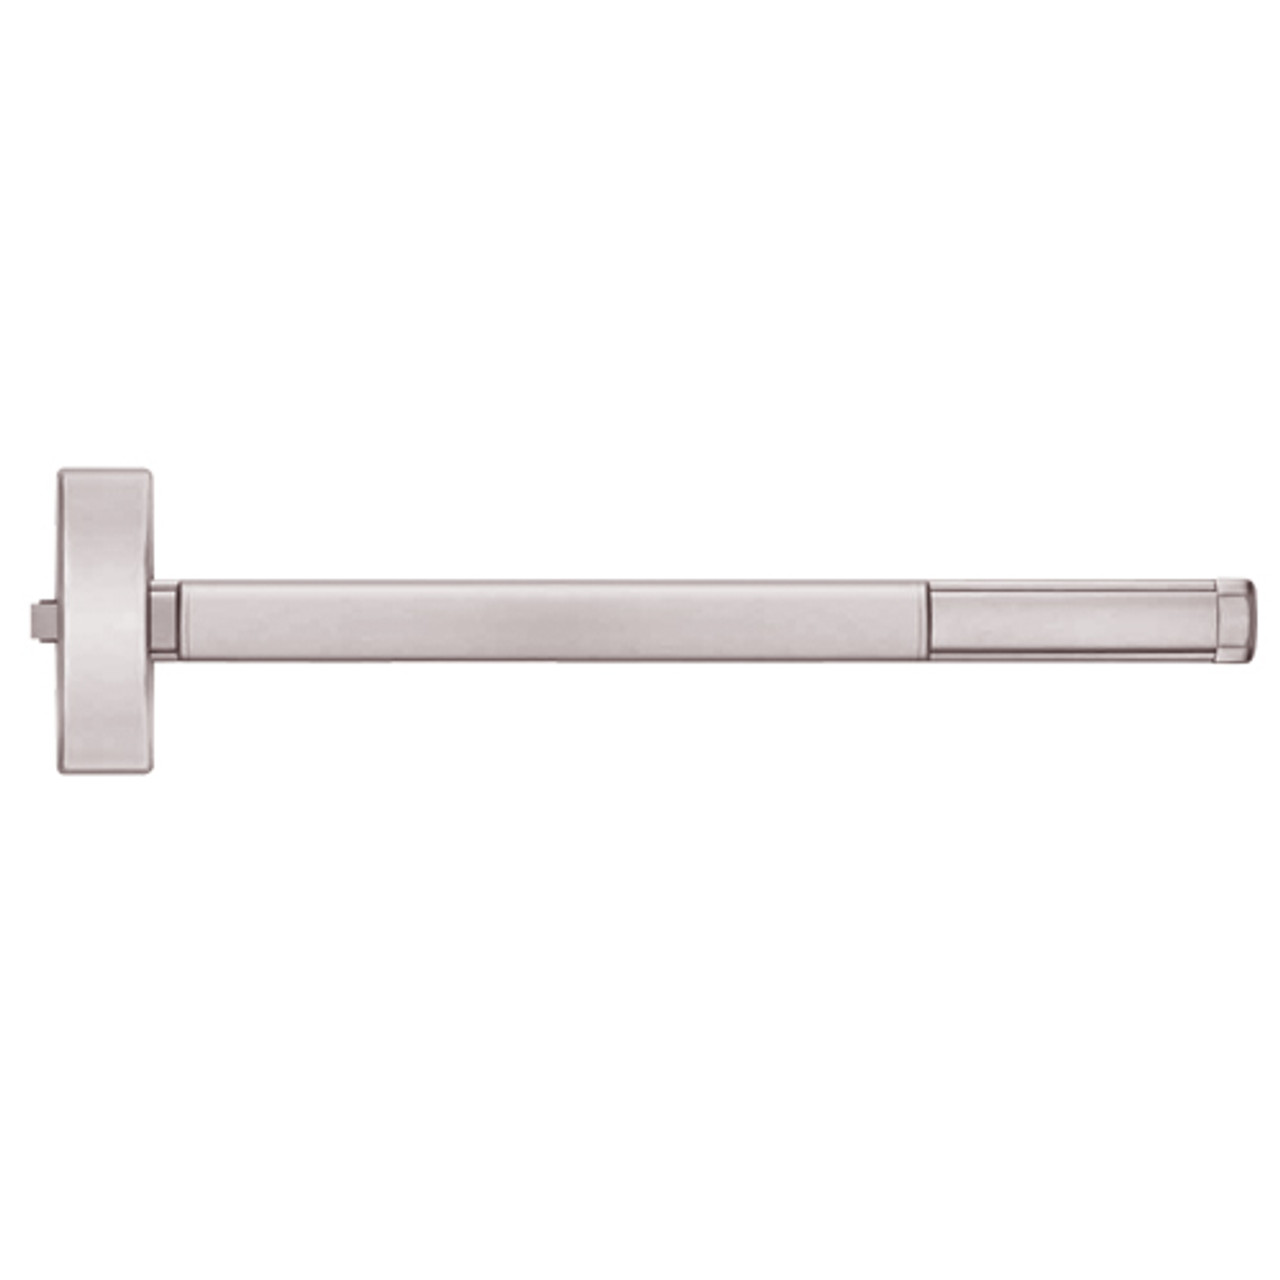 TS2115-628-48 PHI 2100 Series Non Fire Rated Apex Rim Exit Device with Touchbar Monitoring Switch Prepped for Thumb Piece Always Active in Satin Aluminum Finish